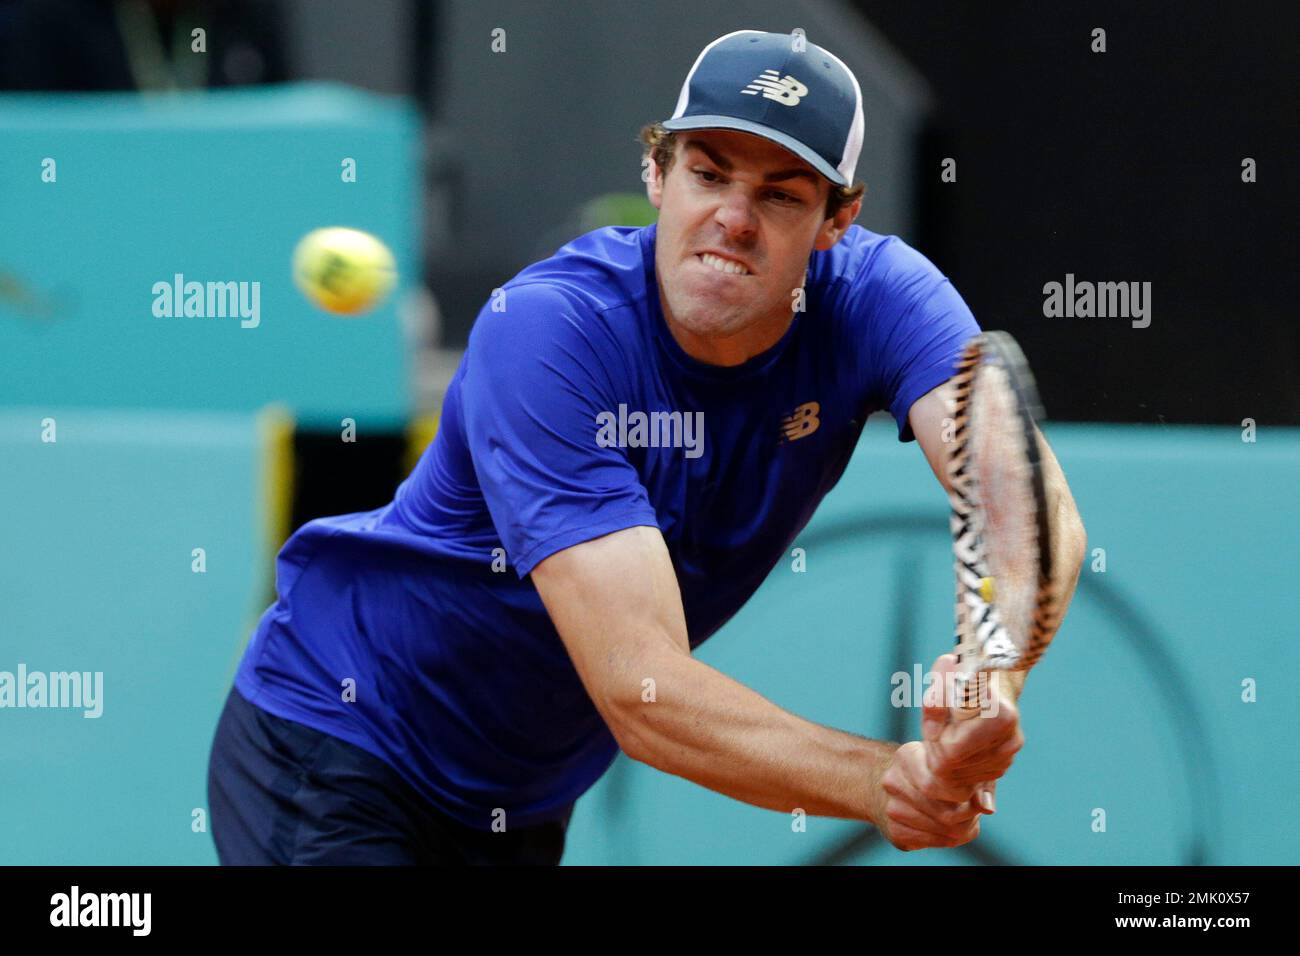 Reilly Opelka, from the United States, returns the ball during his match against Dominic Thiem, from Austria, during the Madrid Open tennis tournament, Tuesday, May 7, 2019, in Madrid, Spain